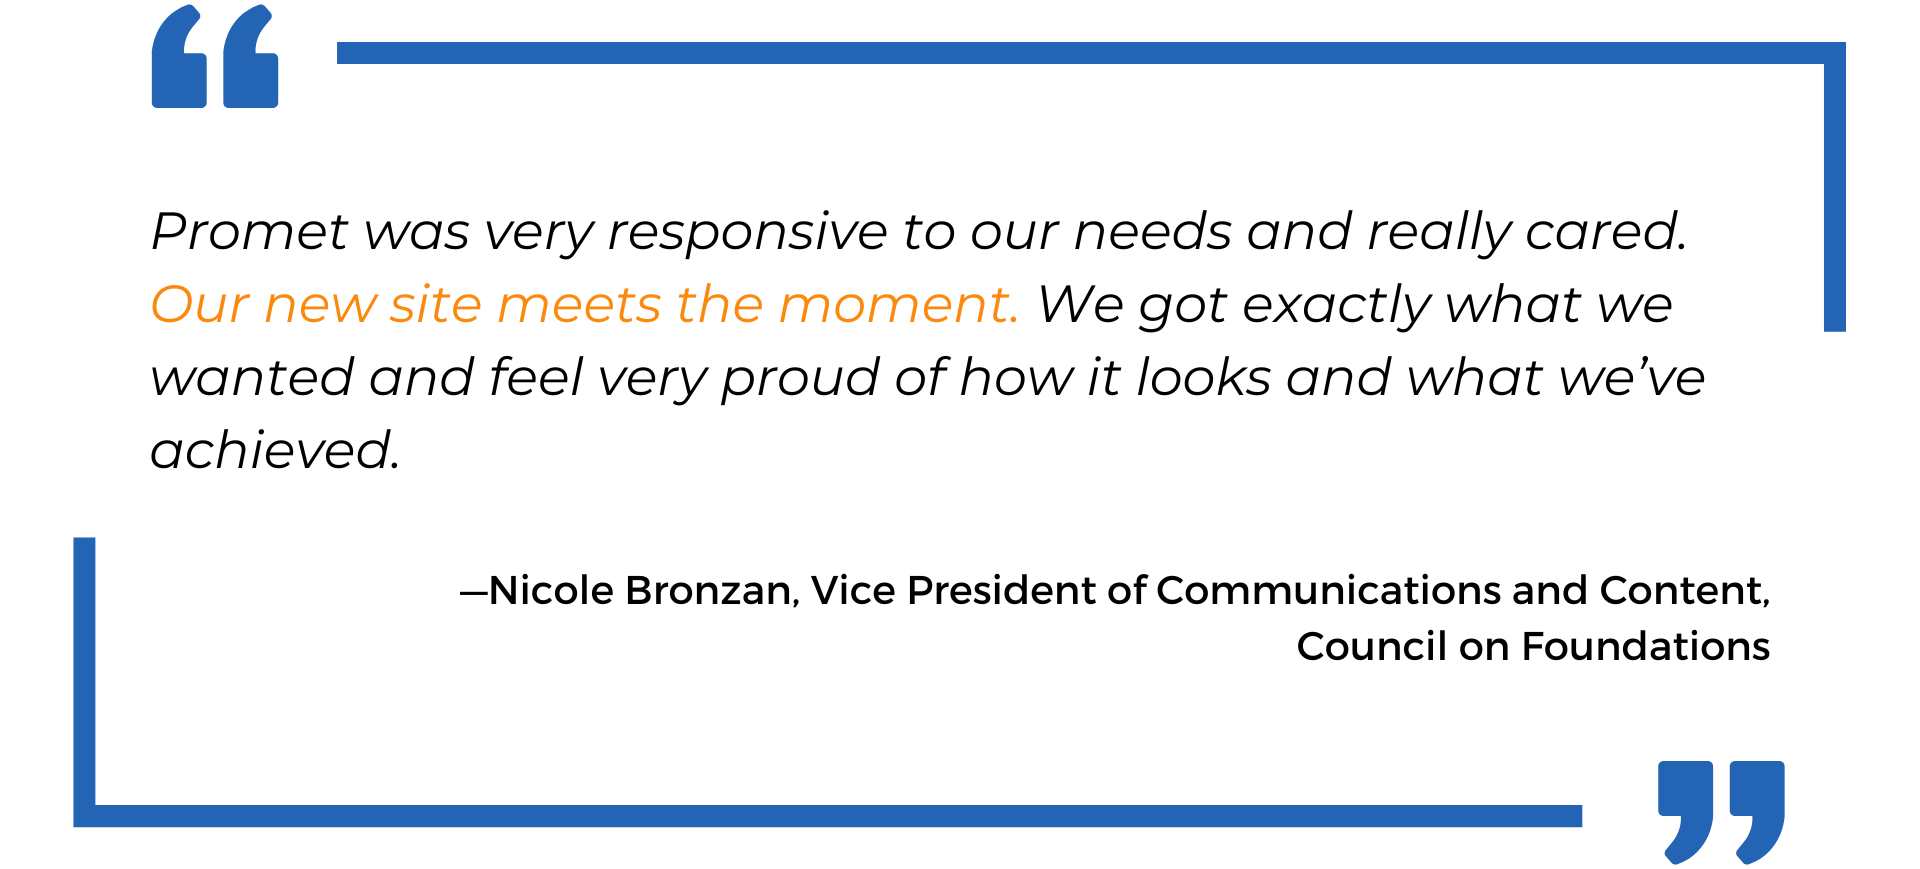 Promet was very responsive to our needs and really cared. - Council on Foundations